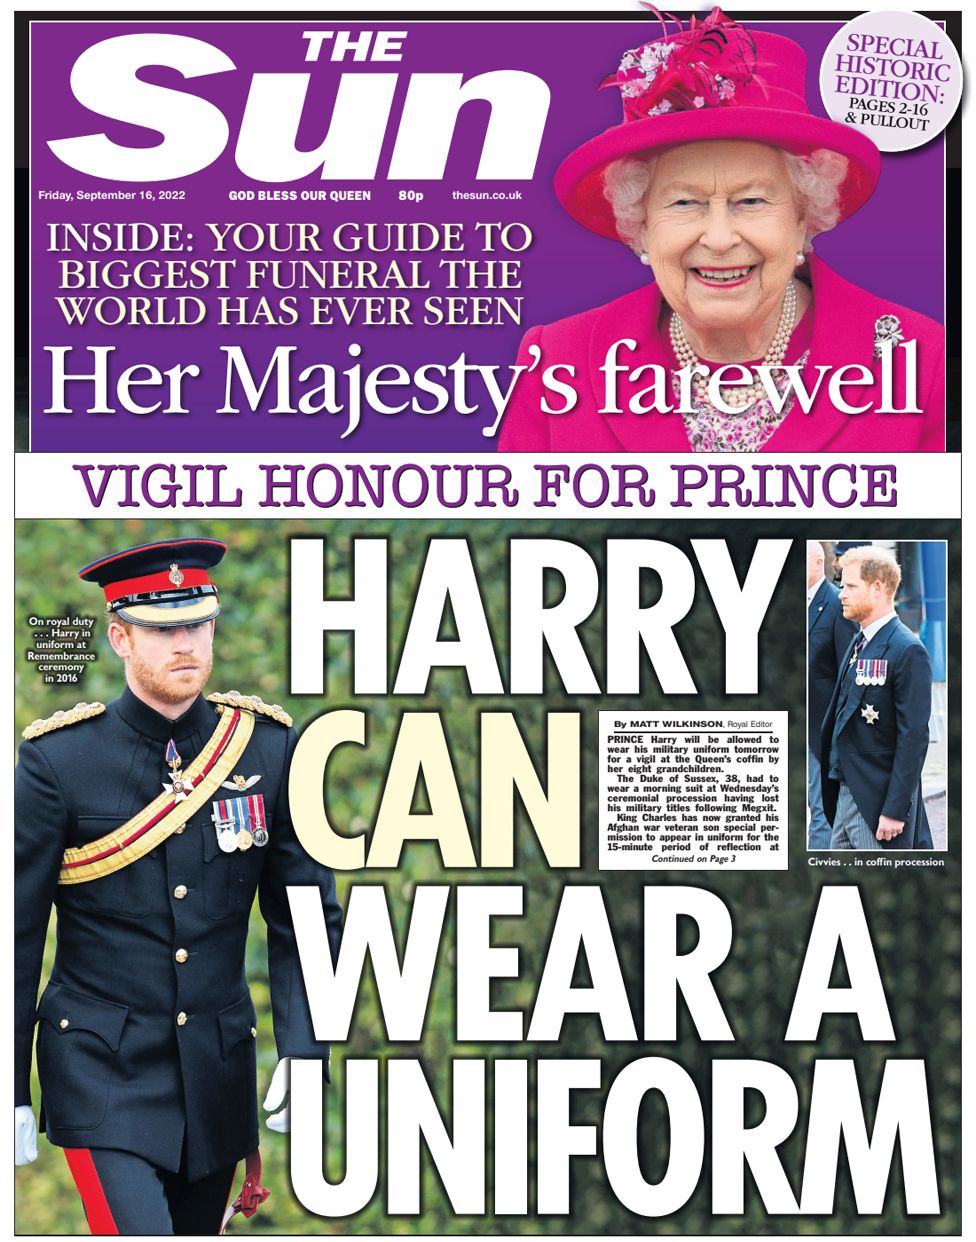 The Sun's front page features a picture of Prince Harry wearing military uniform.